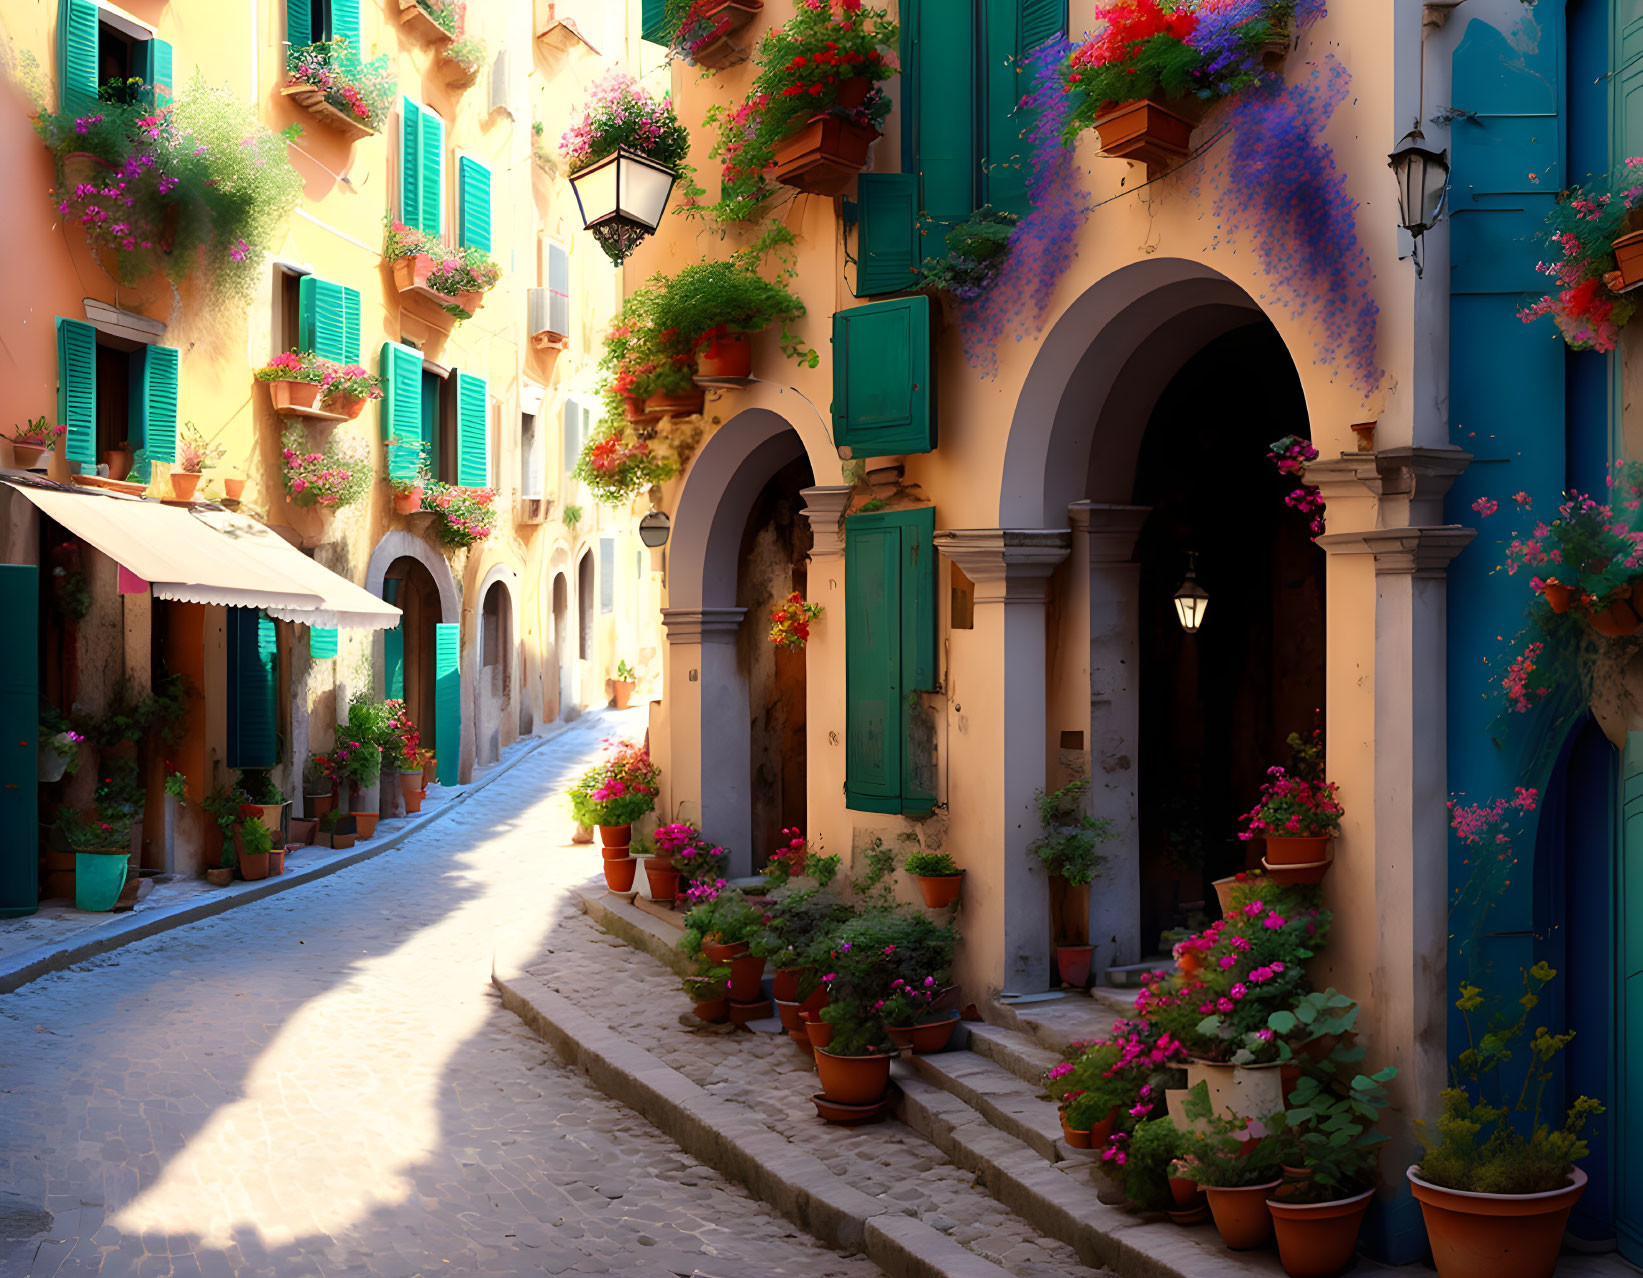 Colorful Buildings on Cobblestone Street with Flower Boxes and Green Shutters